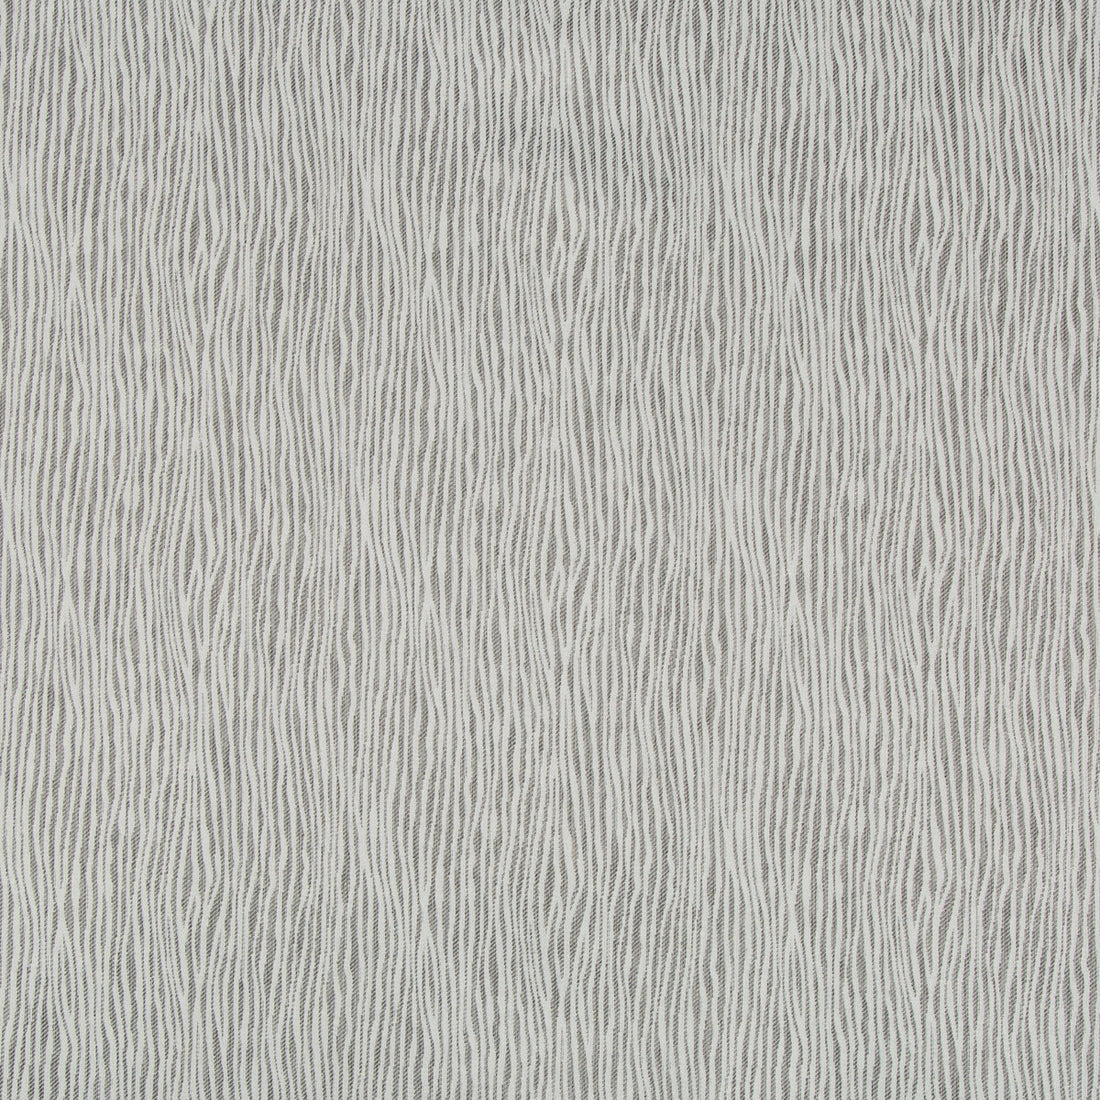 Stringer fabric in graphite color - pattern 35058.21.0 - by Kravet Basics in the Jeffrey Alan Marks Oceanview collection